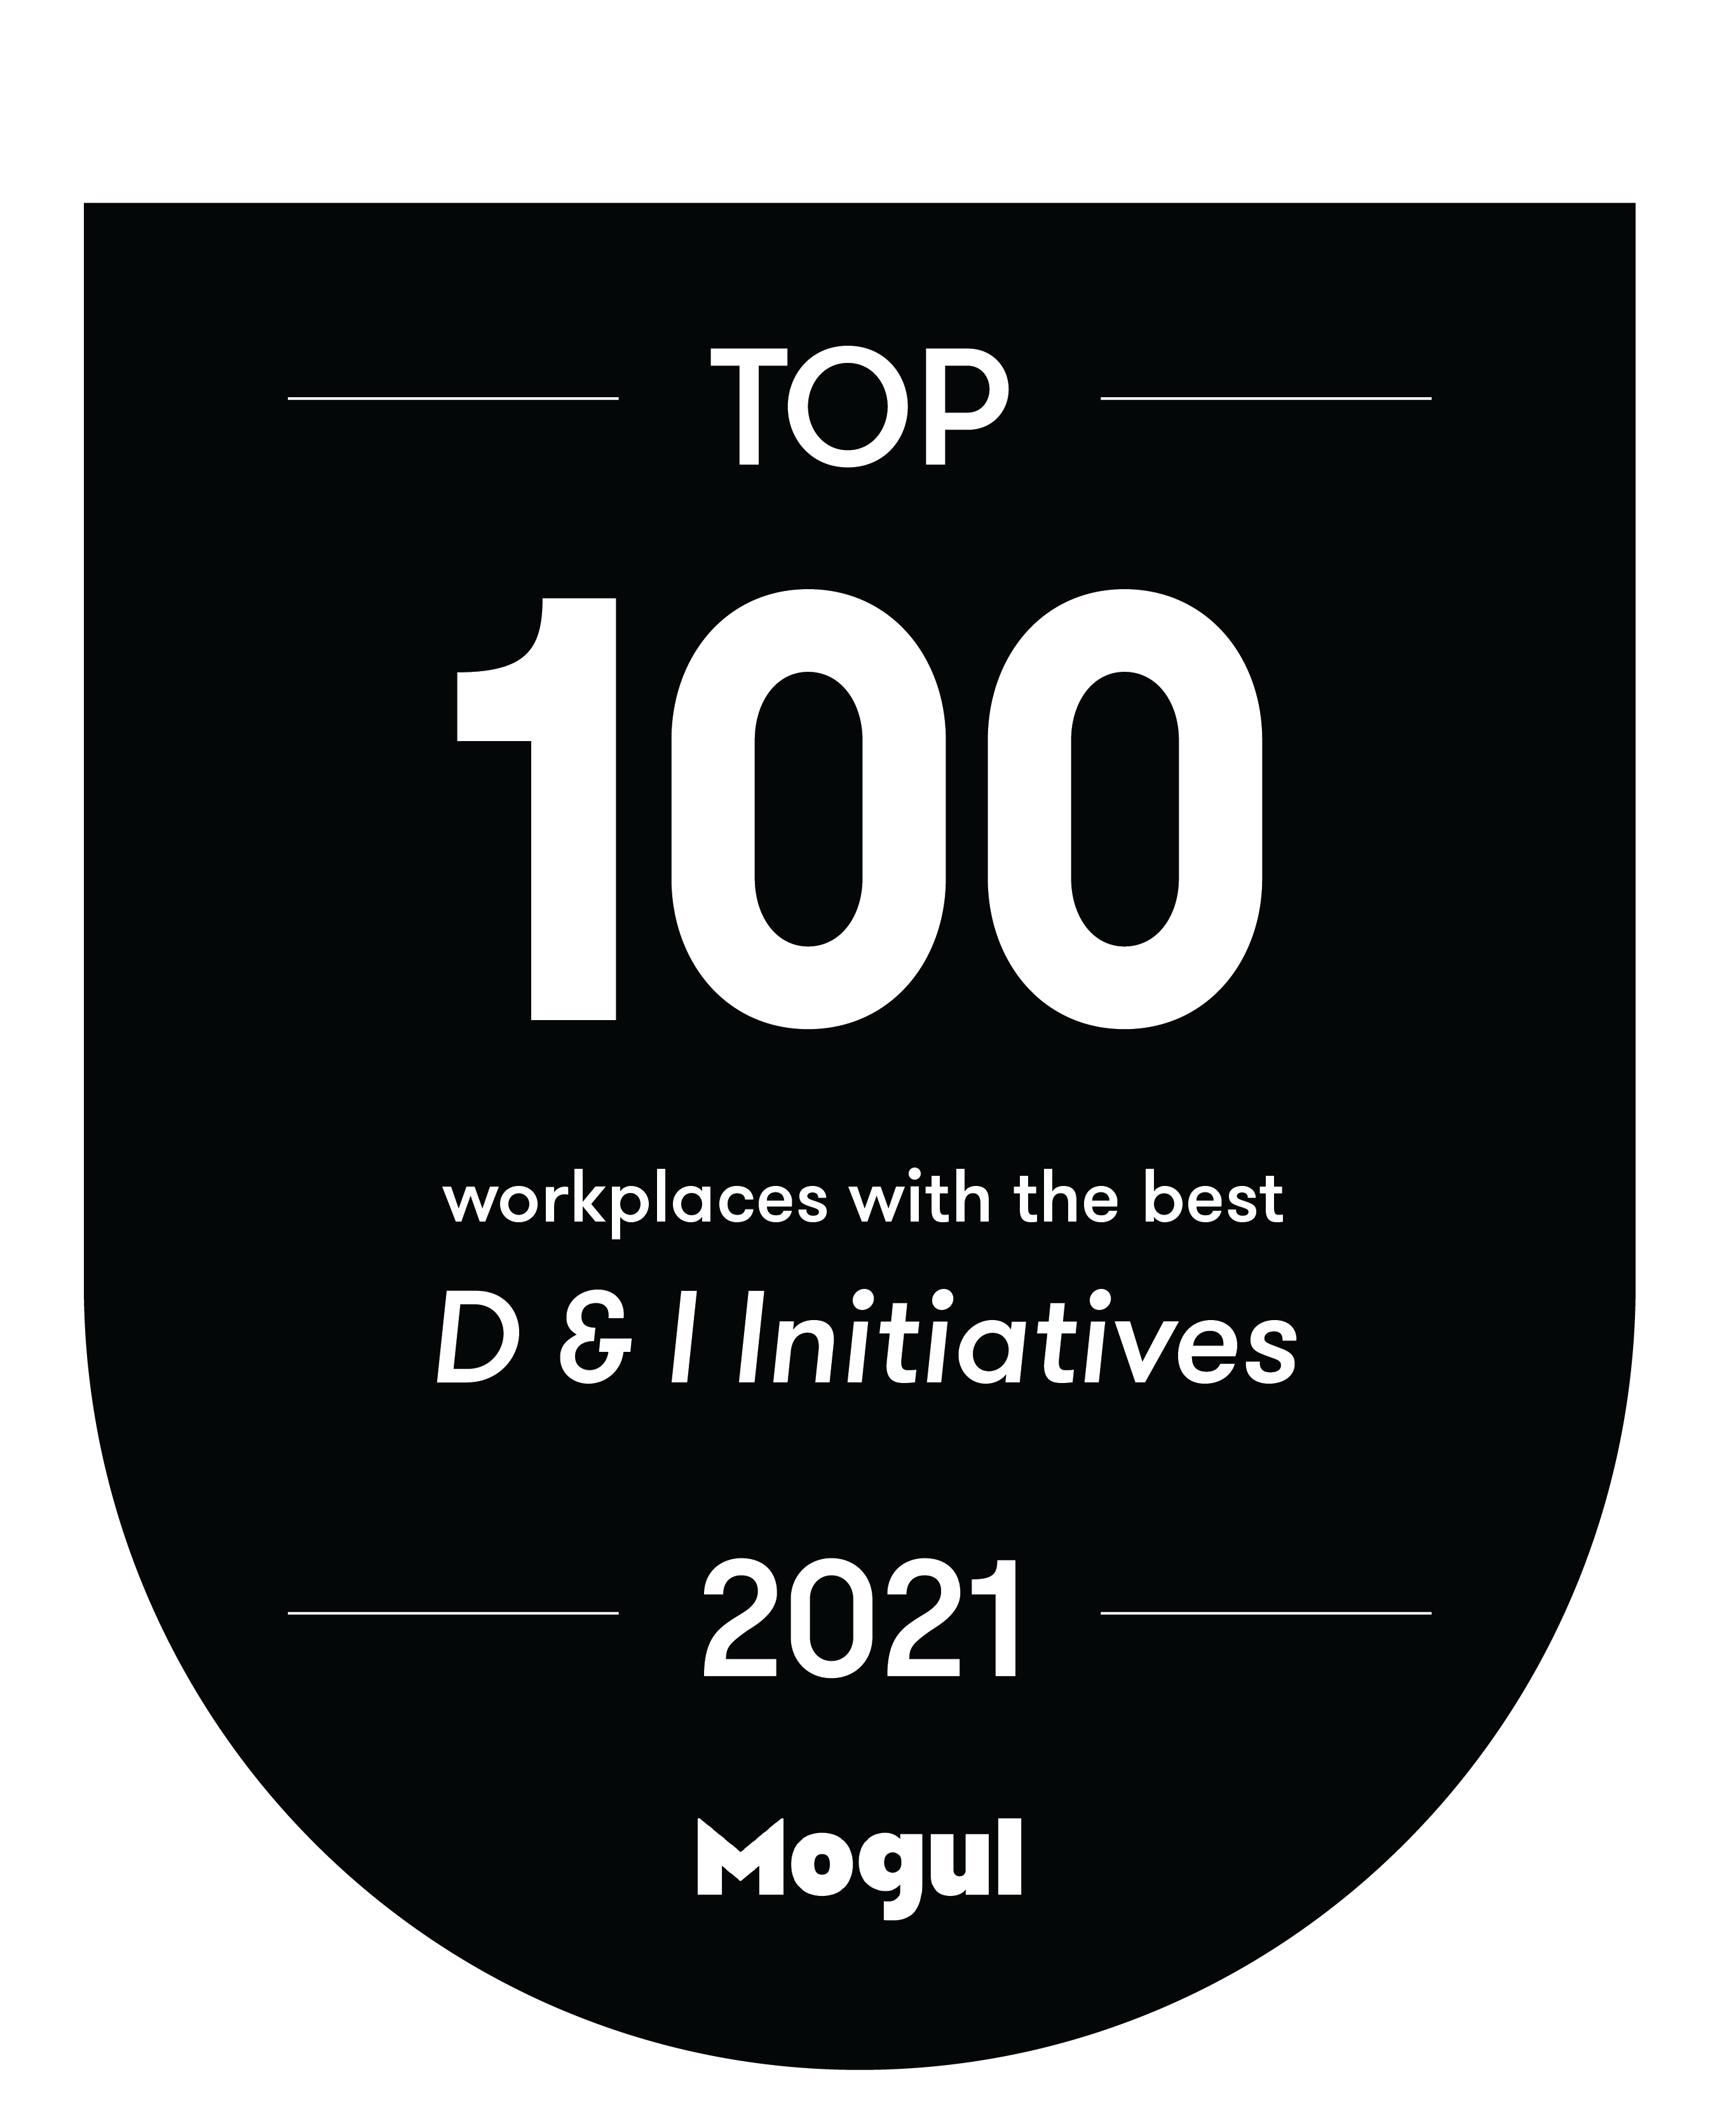 KnowBe4 Makes Mogul's Top 100 Workplaces With the Best D&I Initiatives in 2021